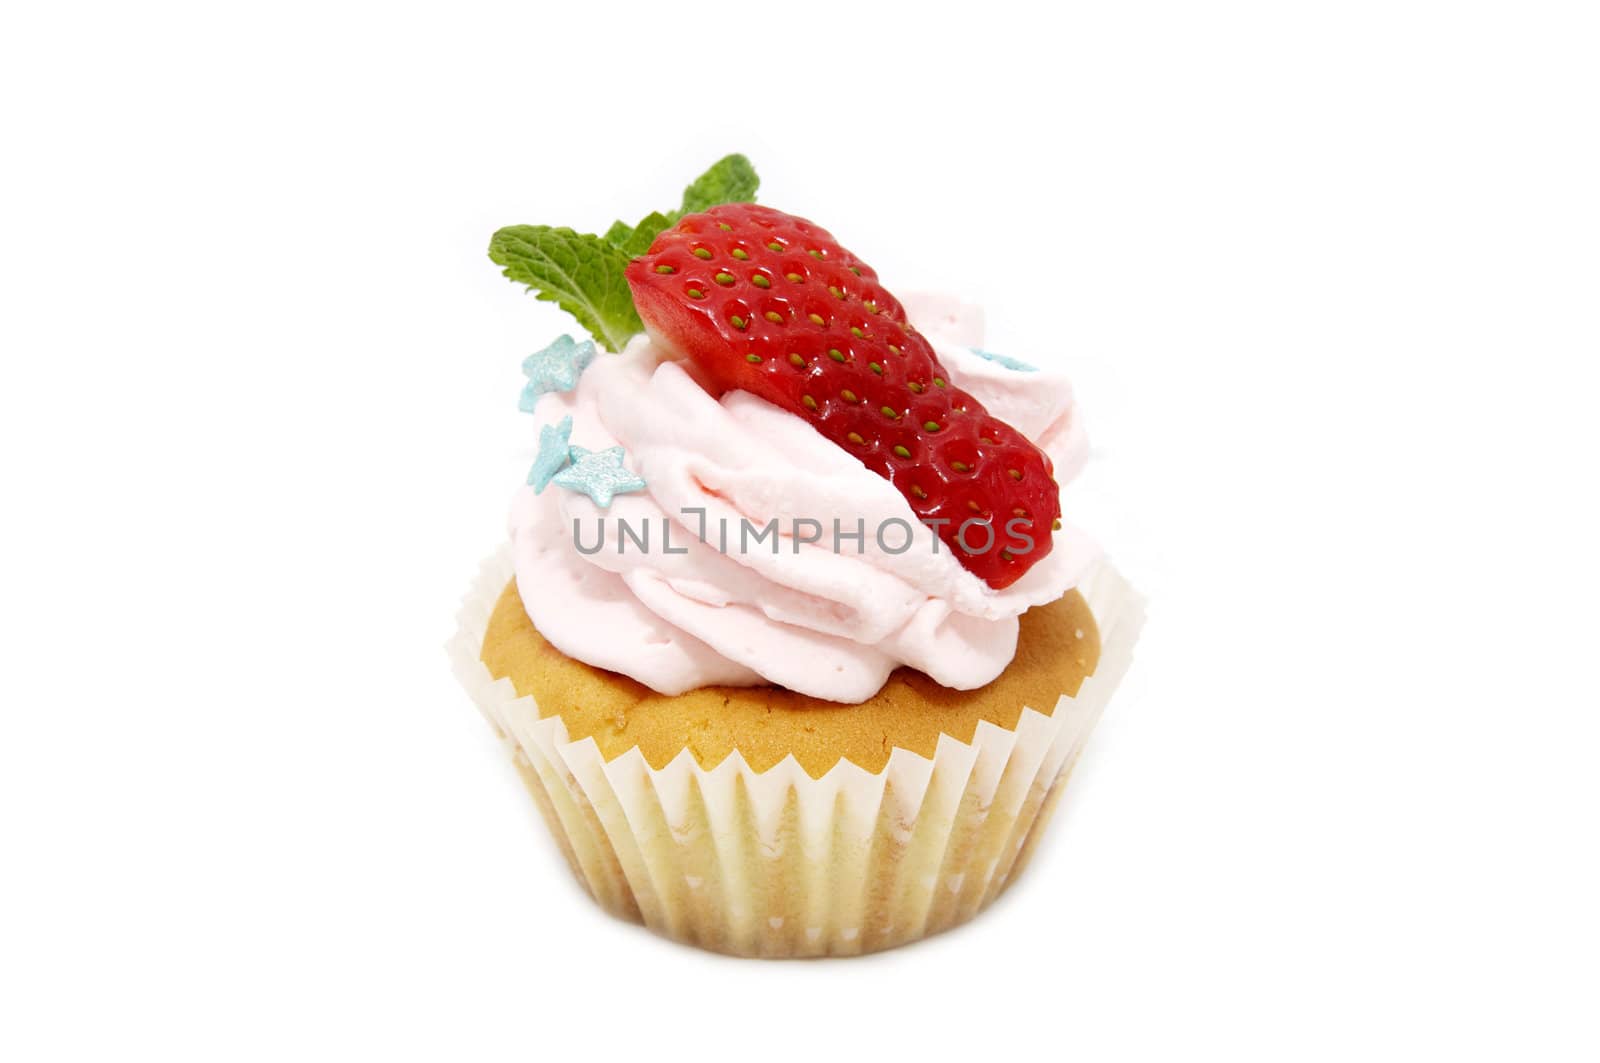 a small cake with cream on a white background